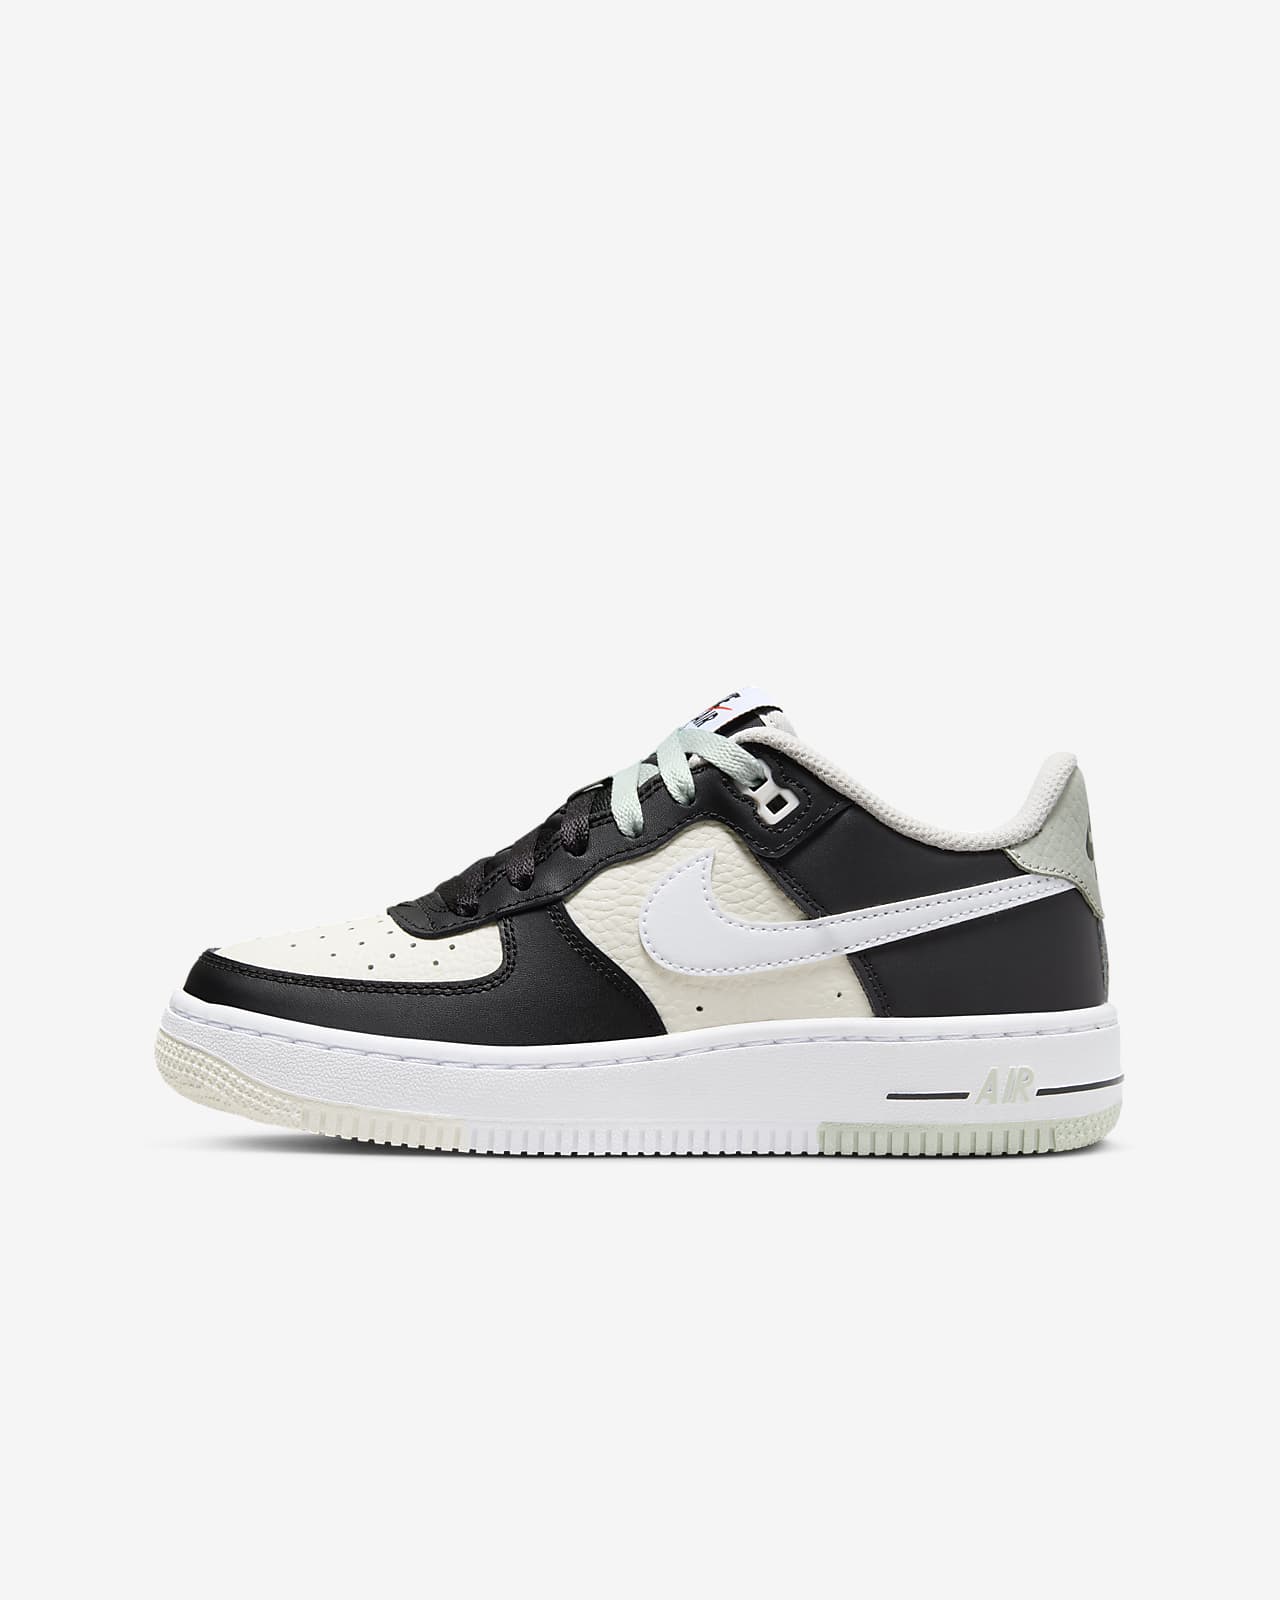 Nike Force 1 LV8 1 Younger Kids' Shoes. Nike ID